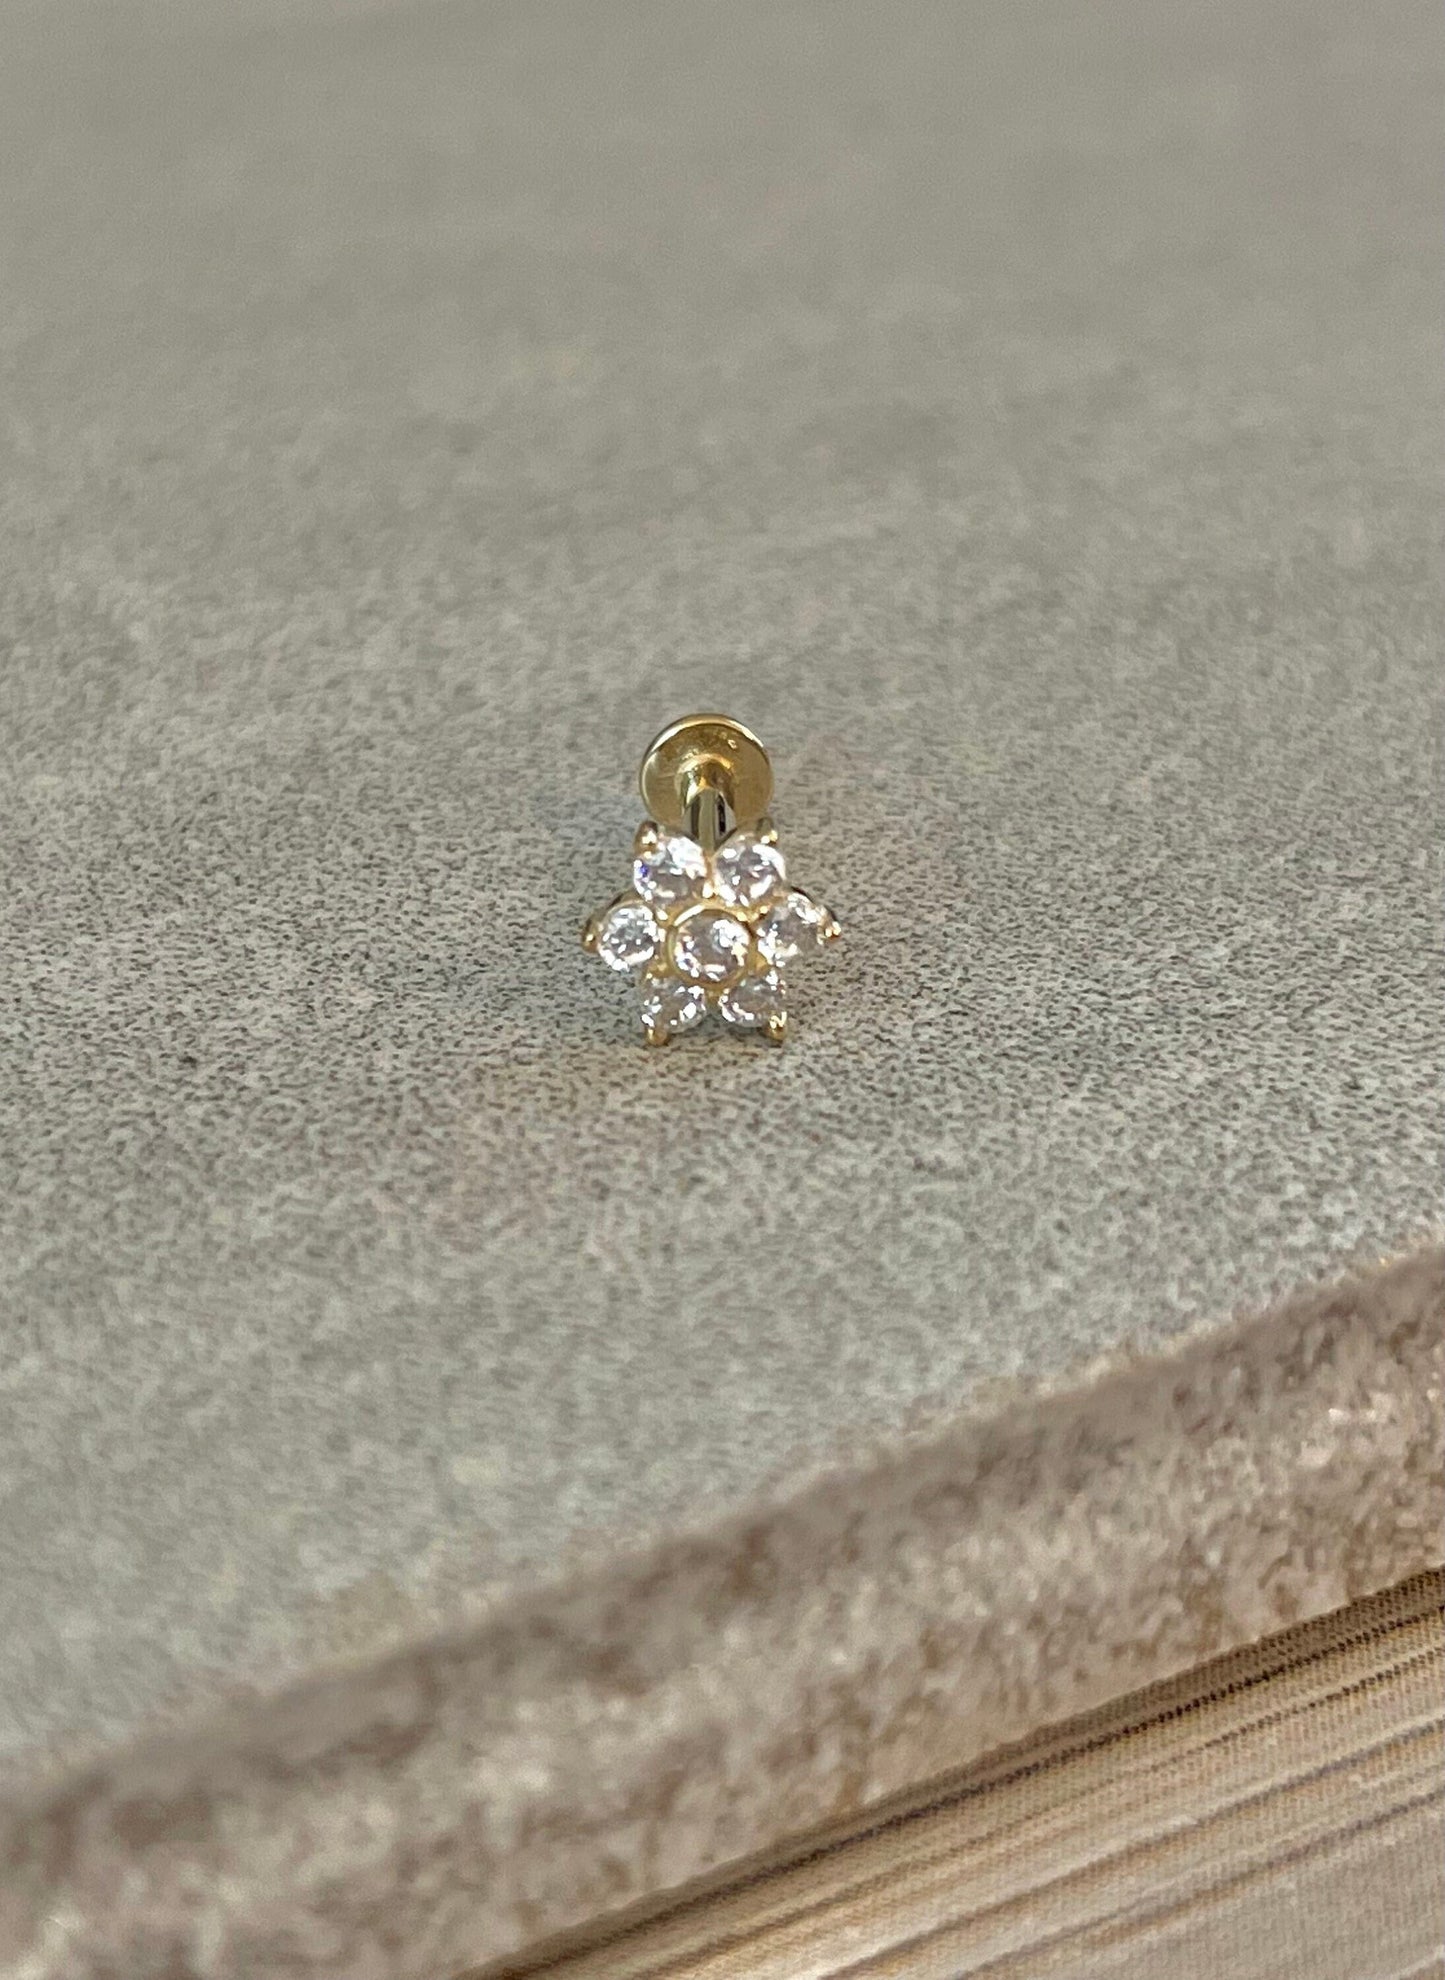 14k Solid Gold Flat Back Flower Stud, Internally Threaded for Cartilage, Tragus, Conch, Helix and more(16g, 6mm or 8mm)